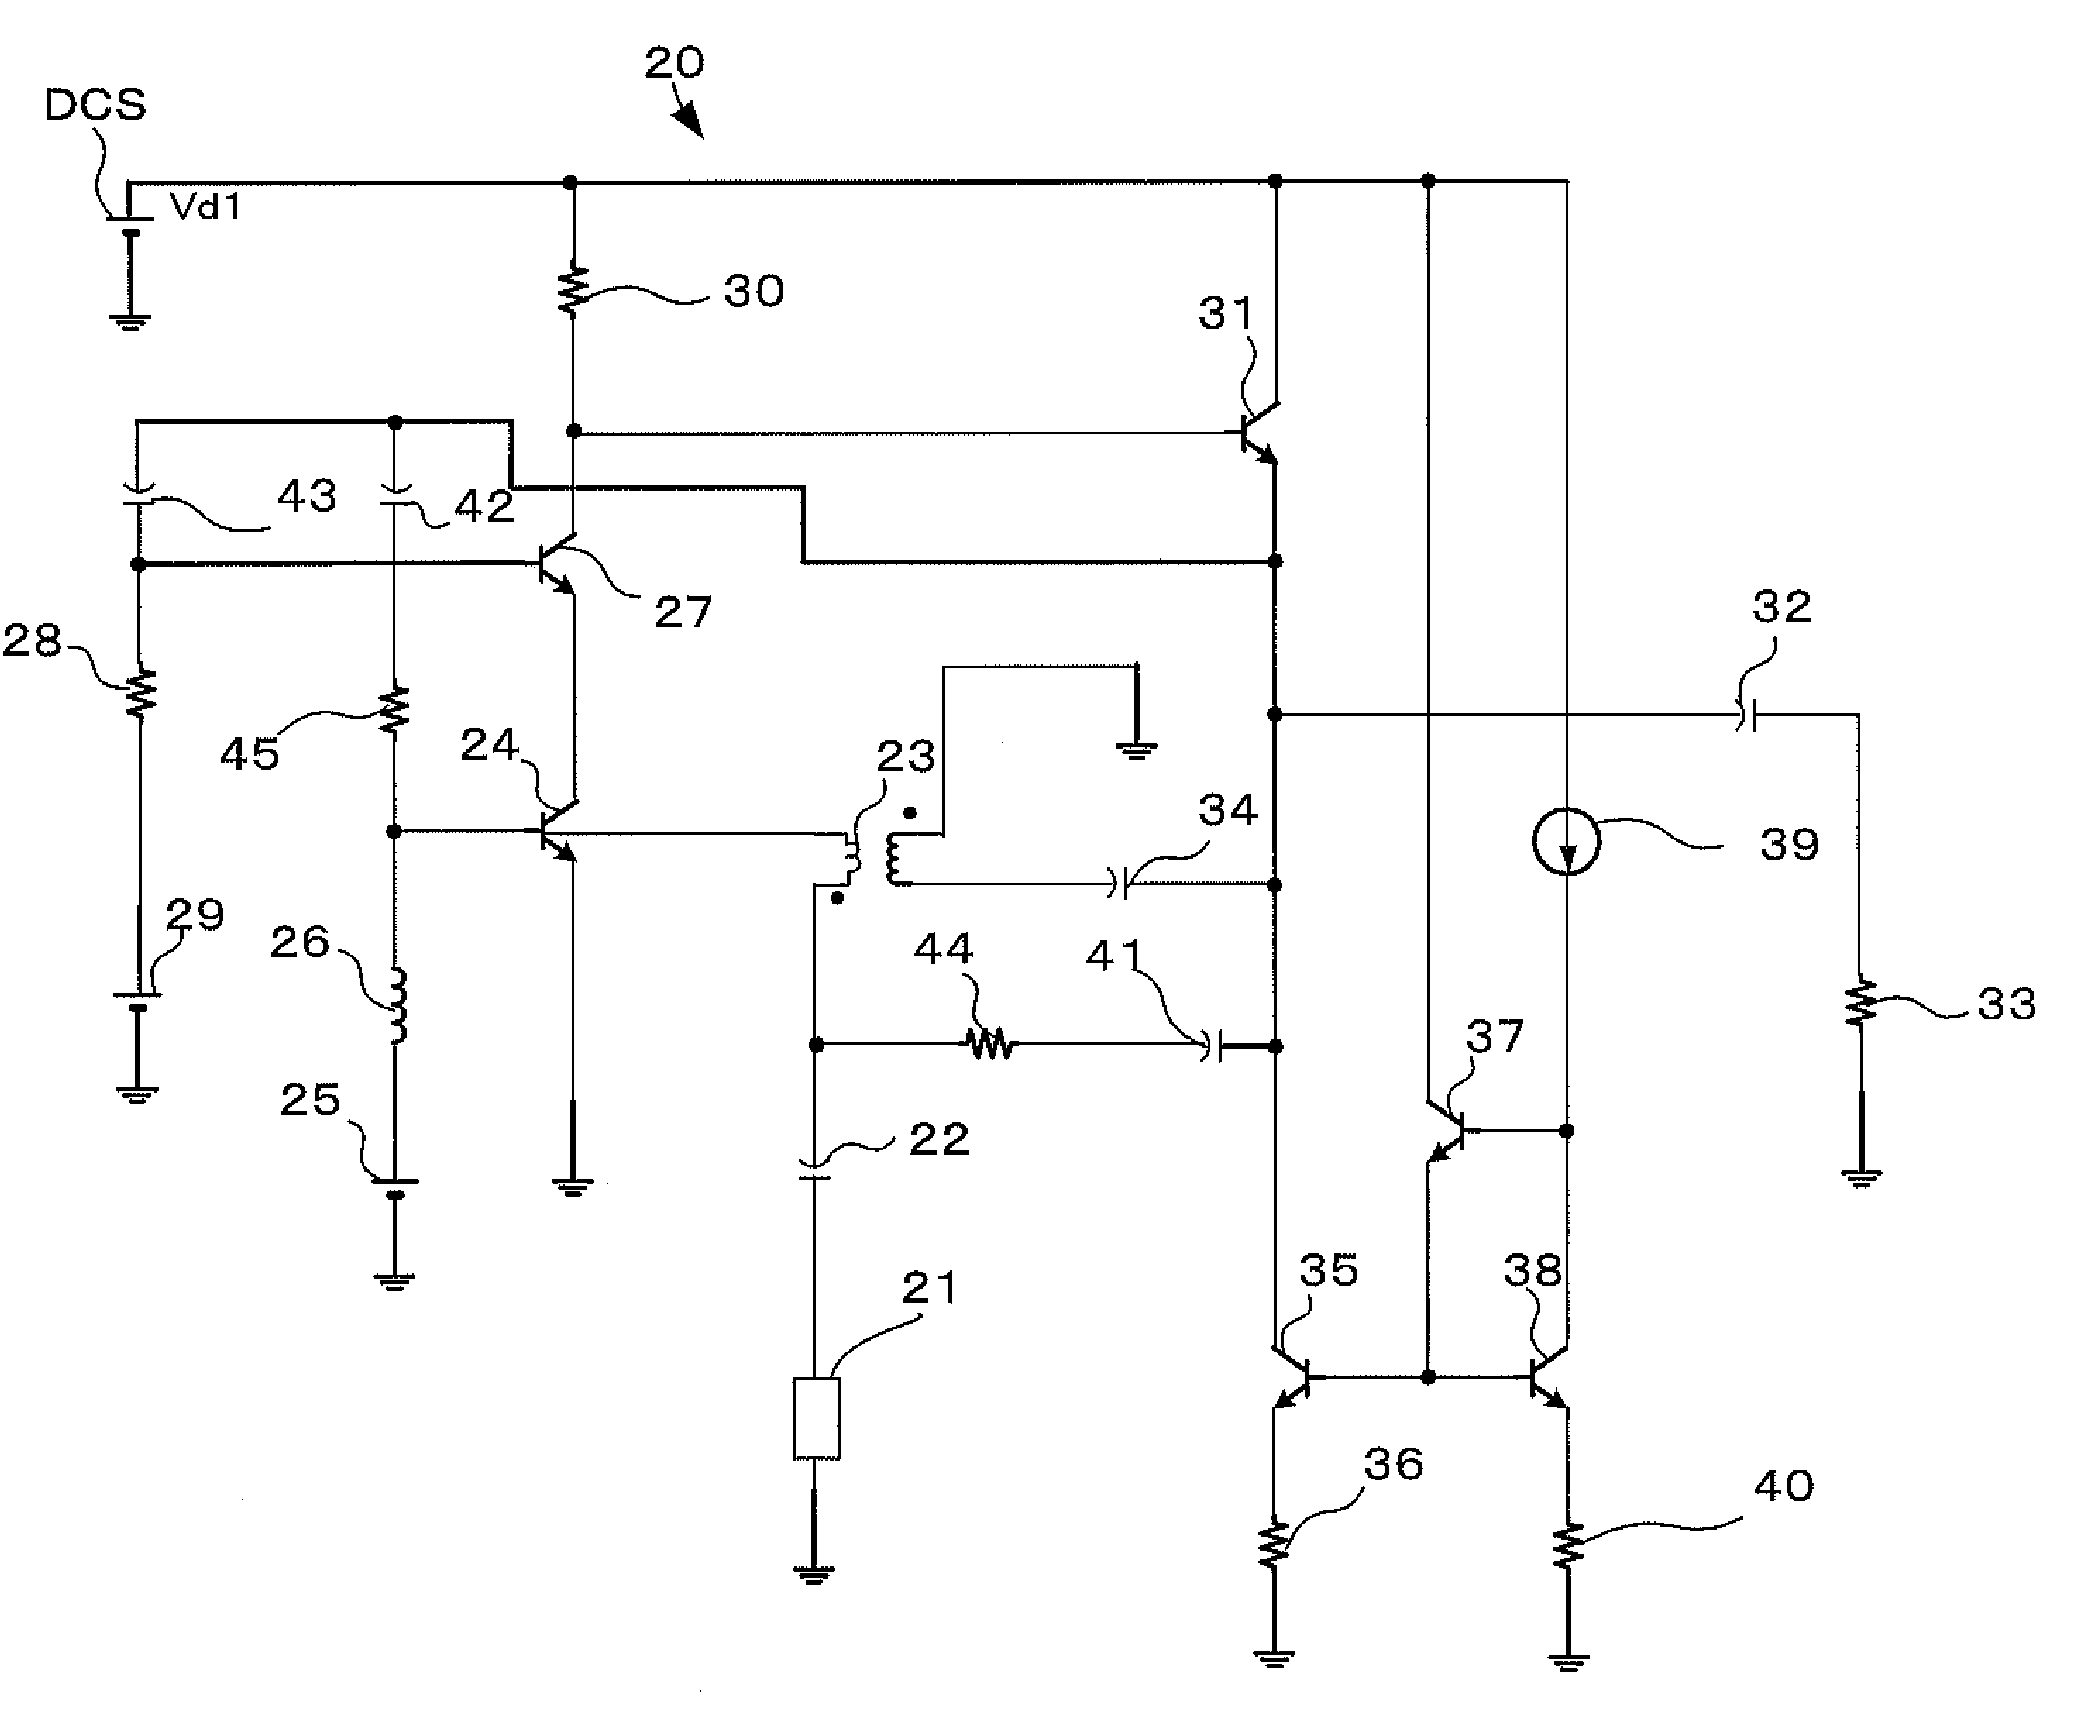 Low noise amplifier and differential amplifier